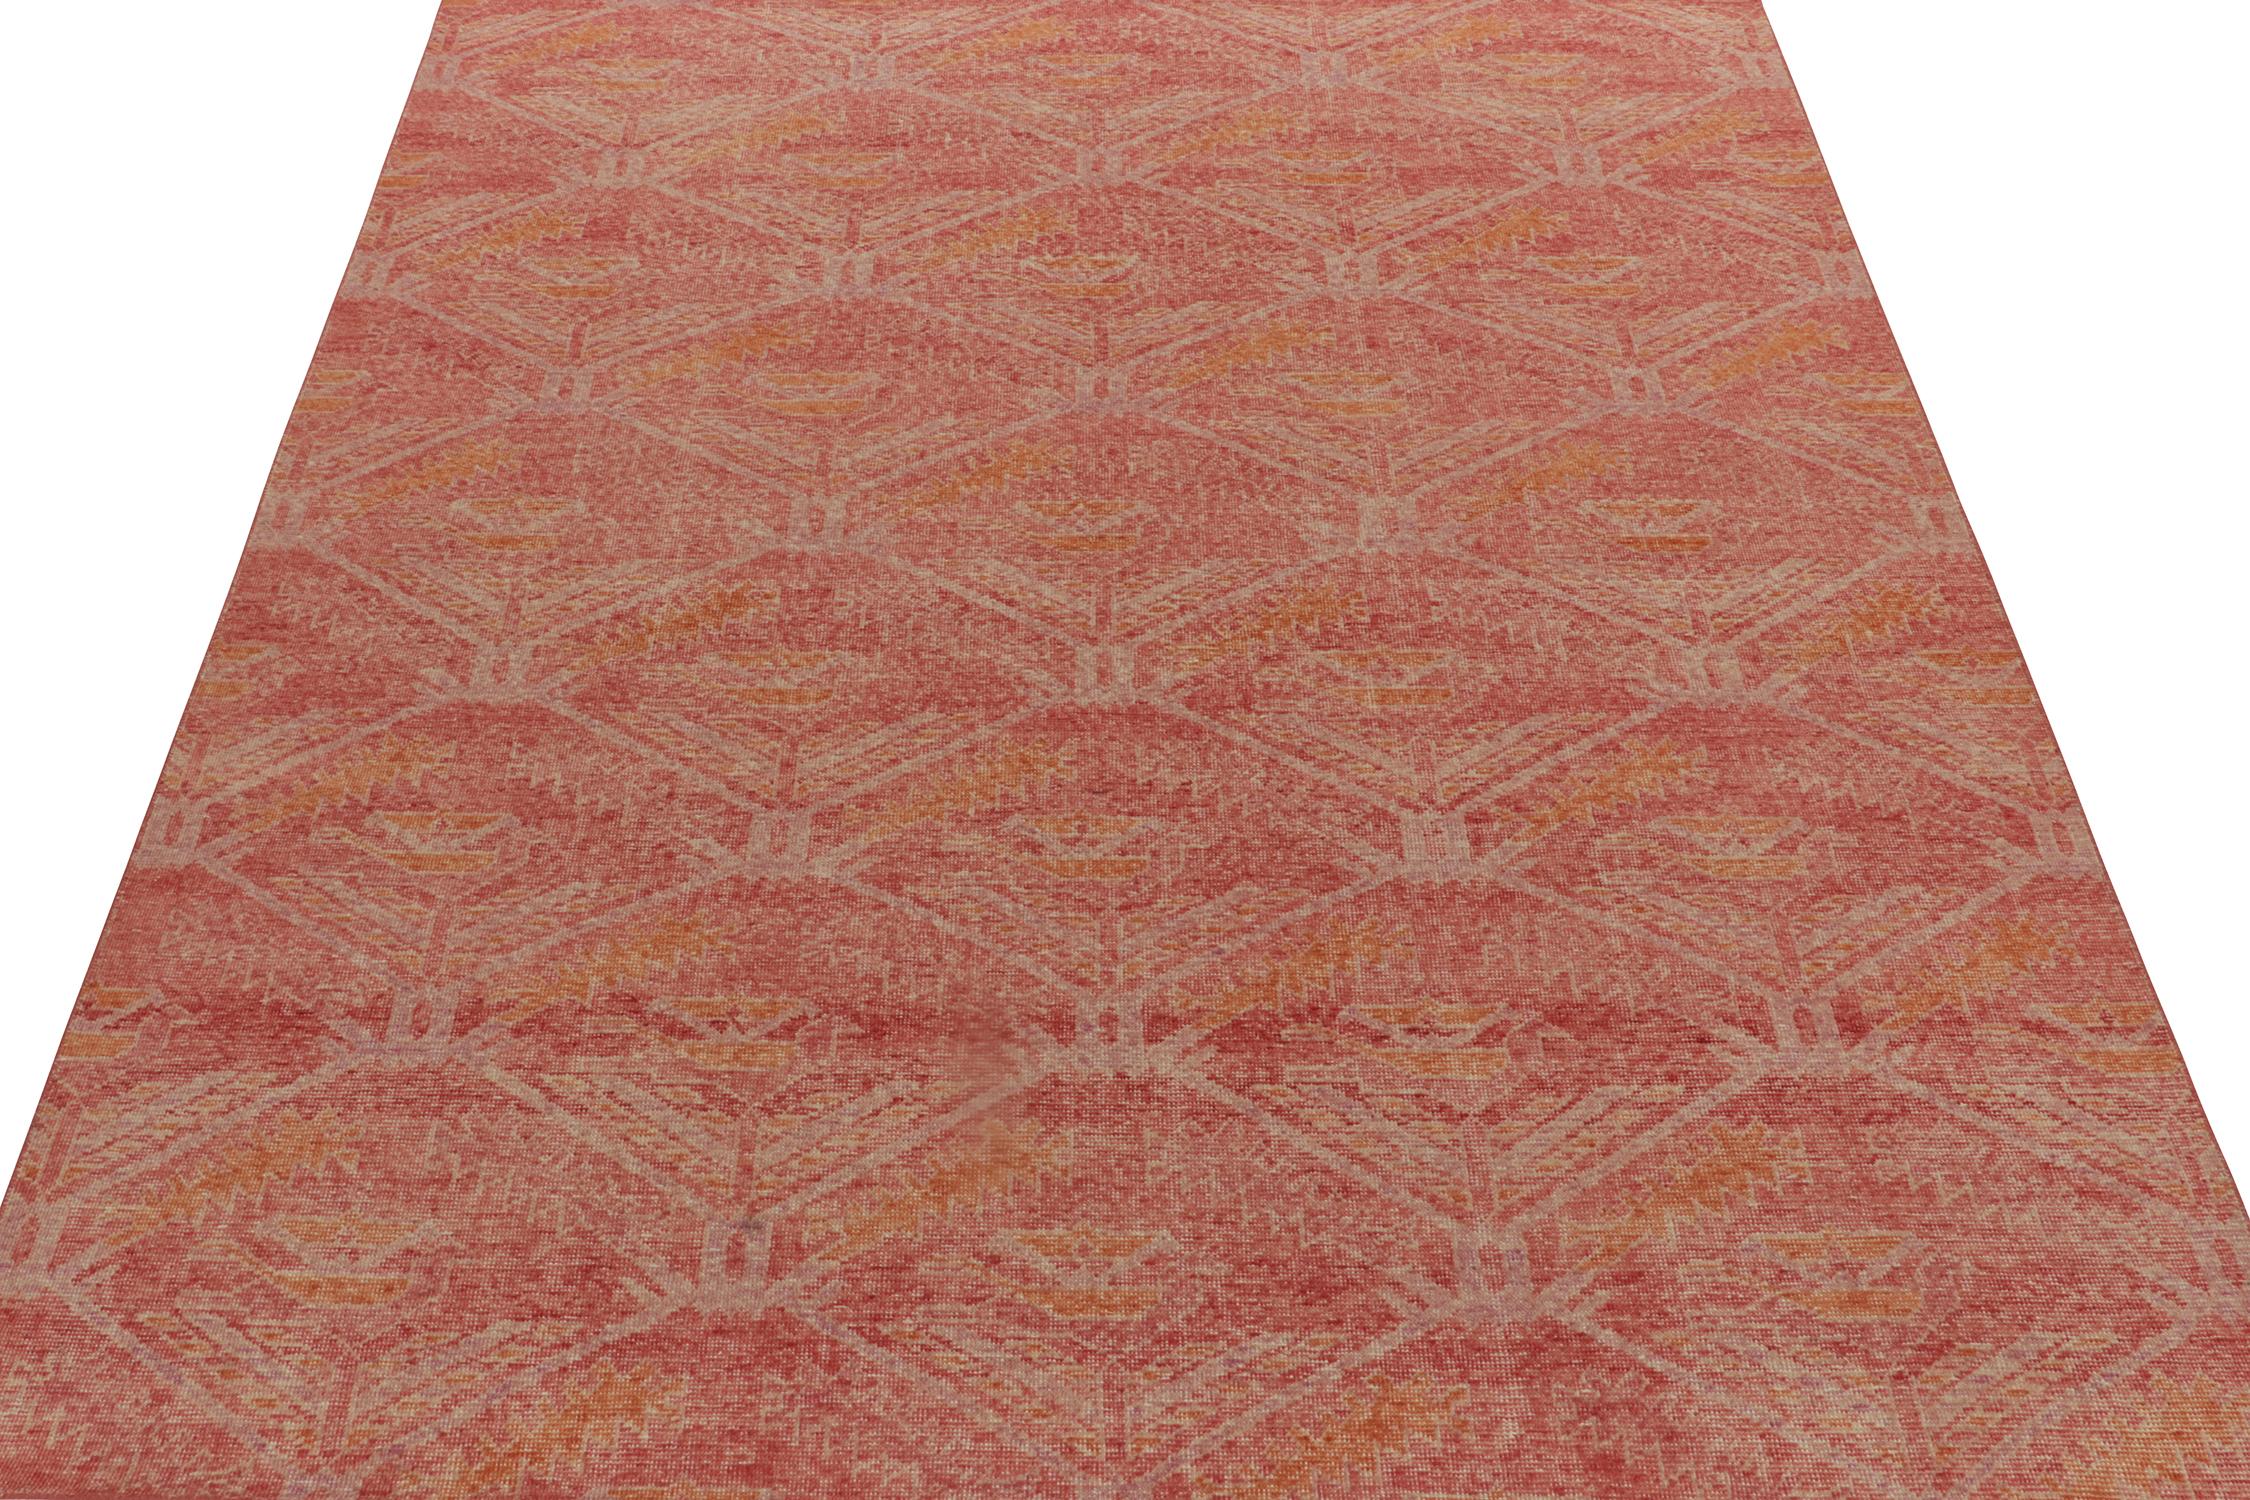 Indian Rug & Kilim’s Distressed Kuba Style Rug in Red with Orange Tribal Patterns For Sale